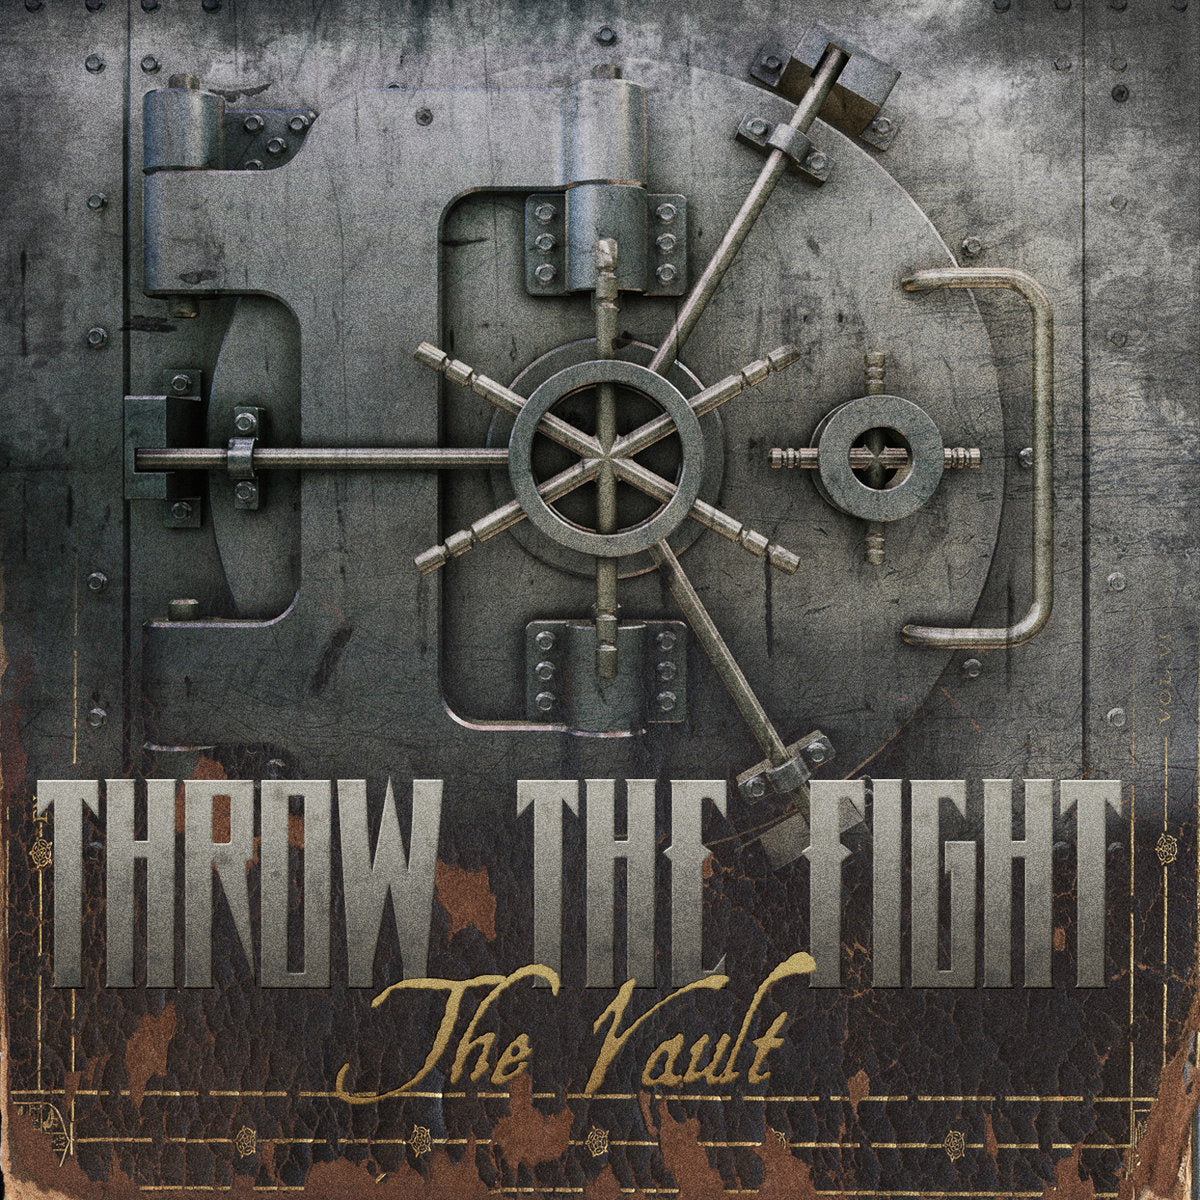 Throw The Fight "The Vault" CD